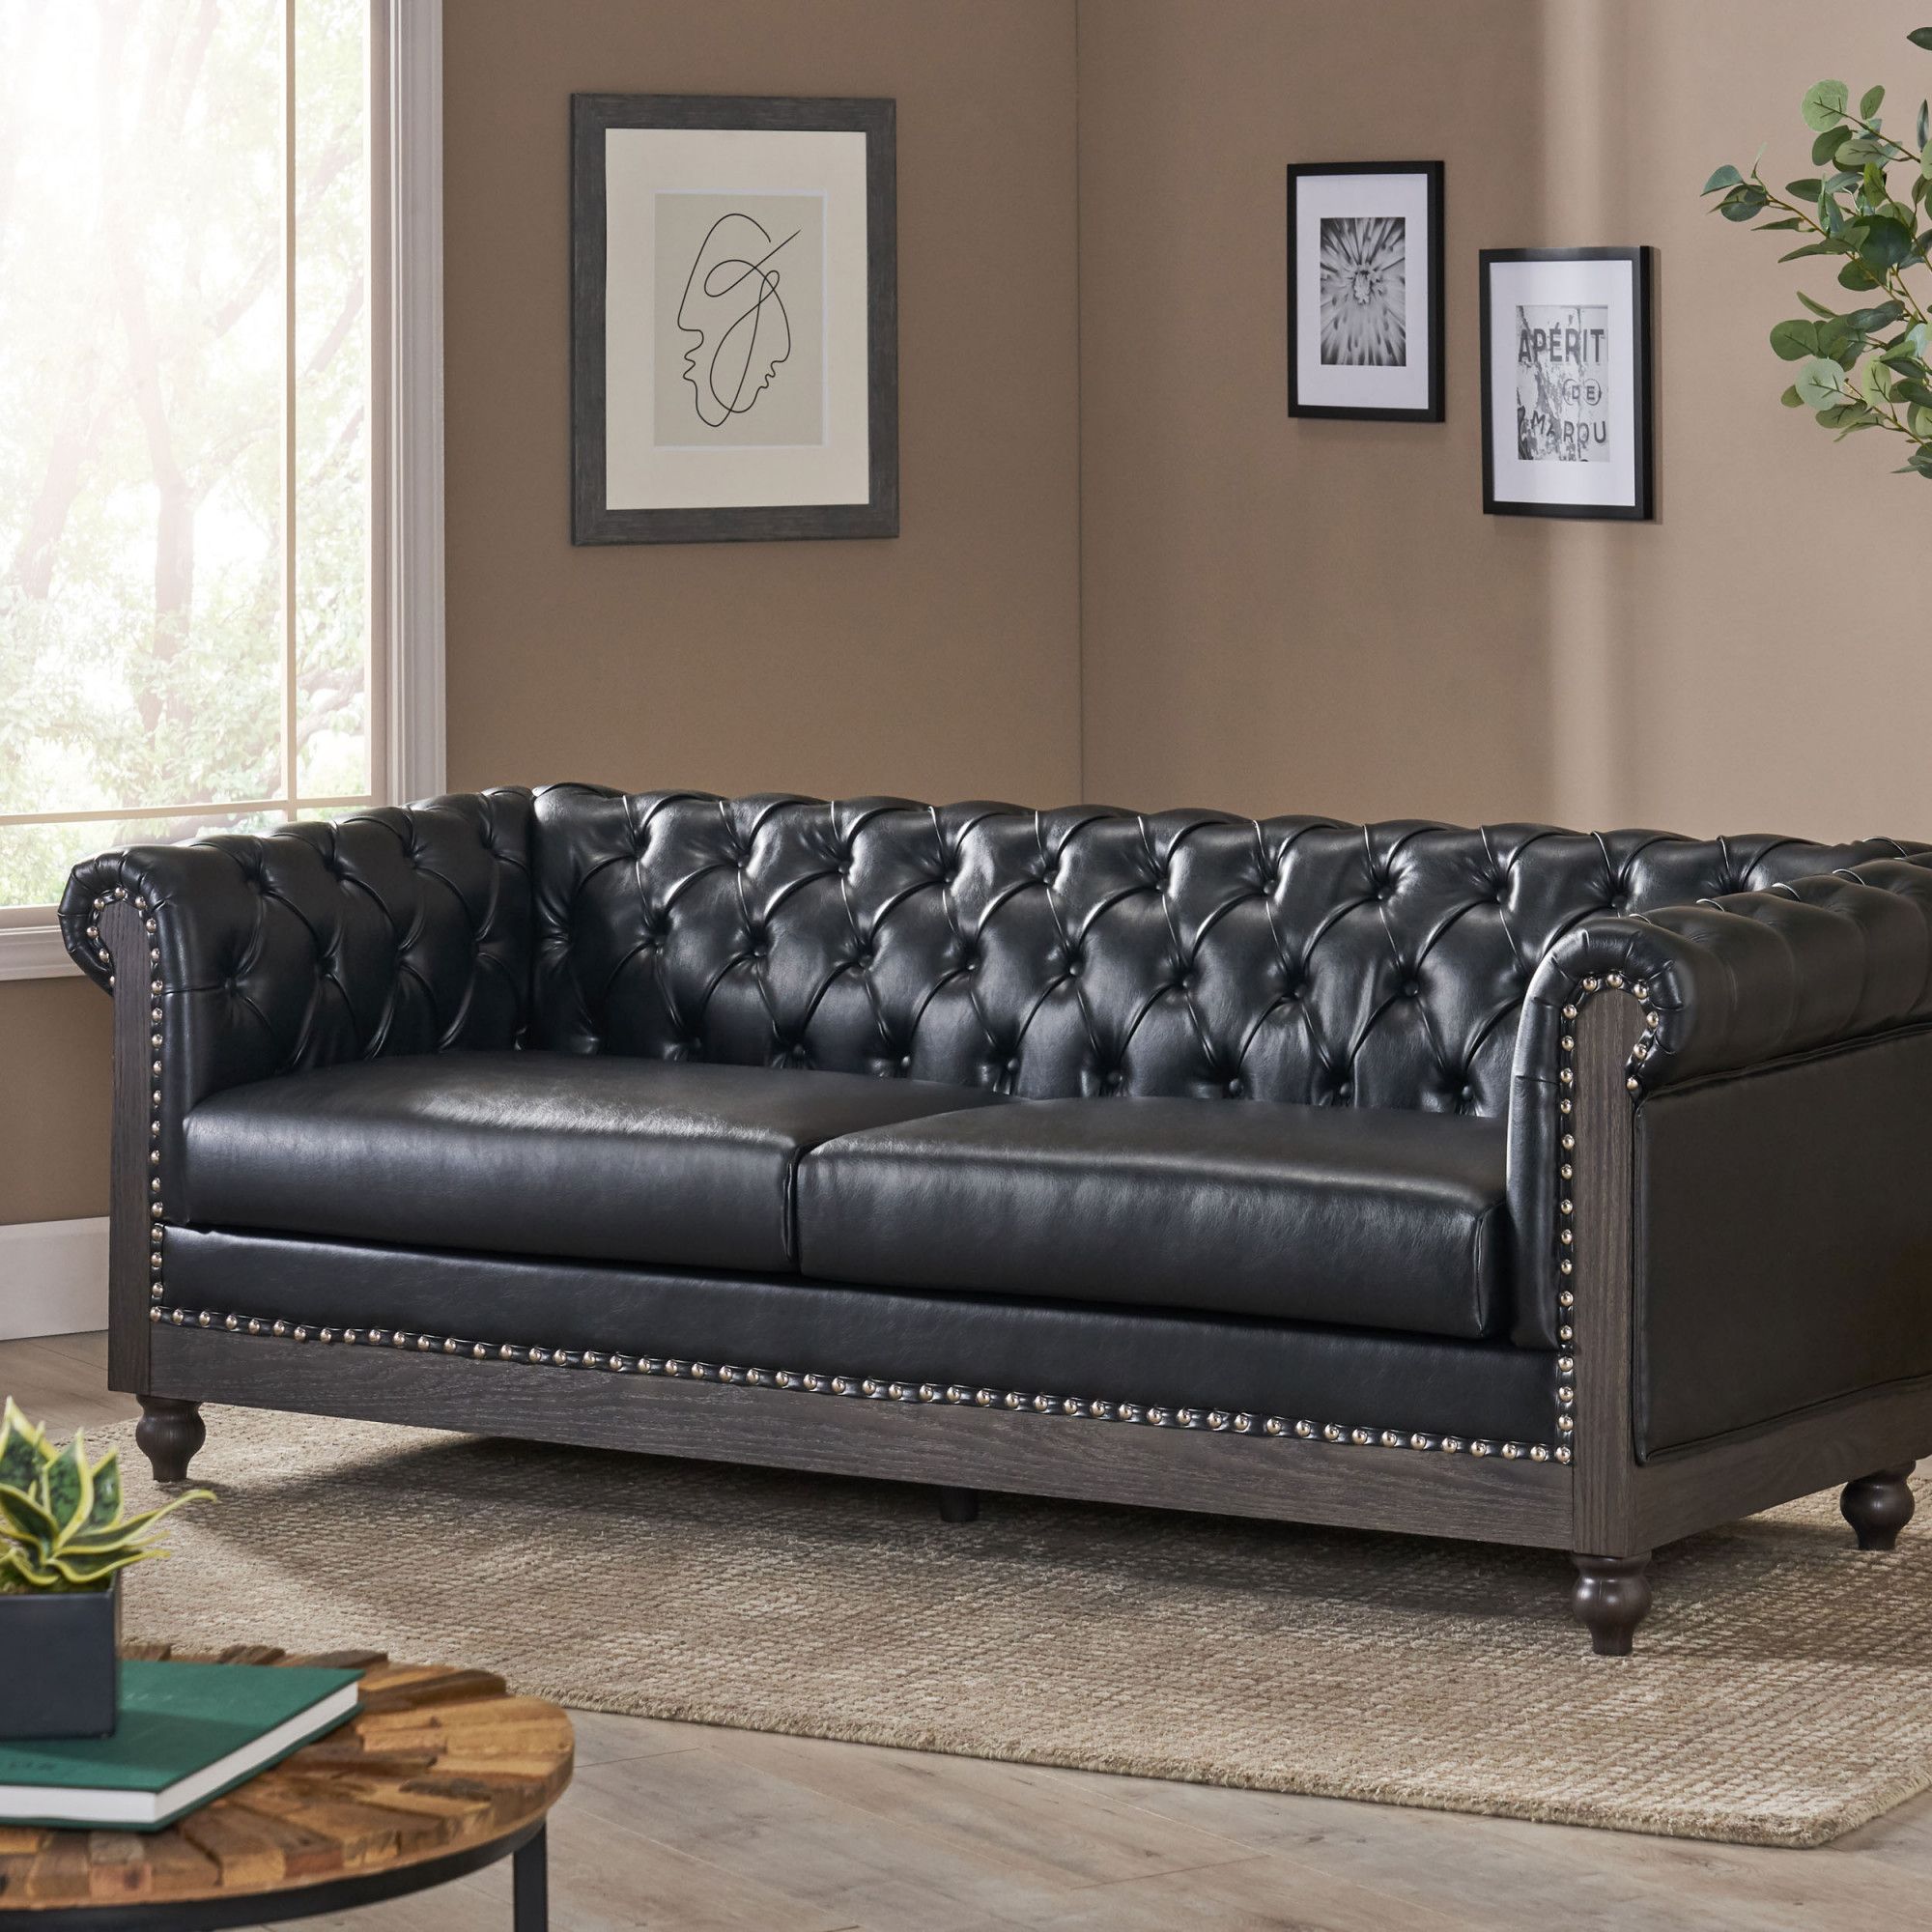 Castalia Chesterfield Tufted 3 Seater Sofa With Nailhead Trim, Midnight  Black And Dark Brown In Midnight Black/Dark Brownnoble House Regarding Sofas With Nailhead Trim (View 15 of 15)